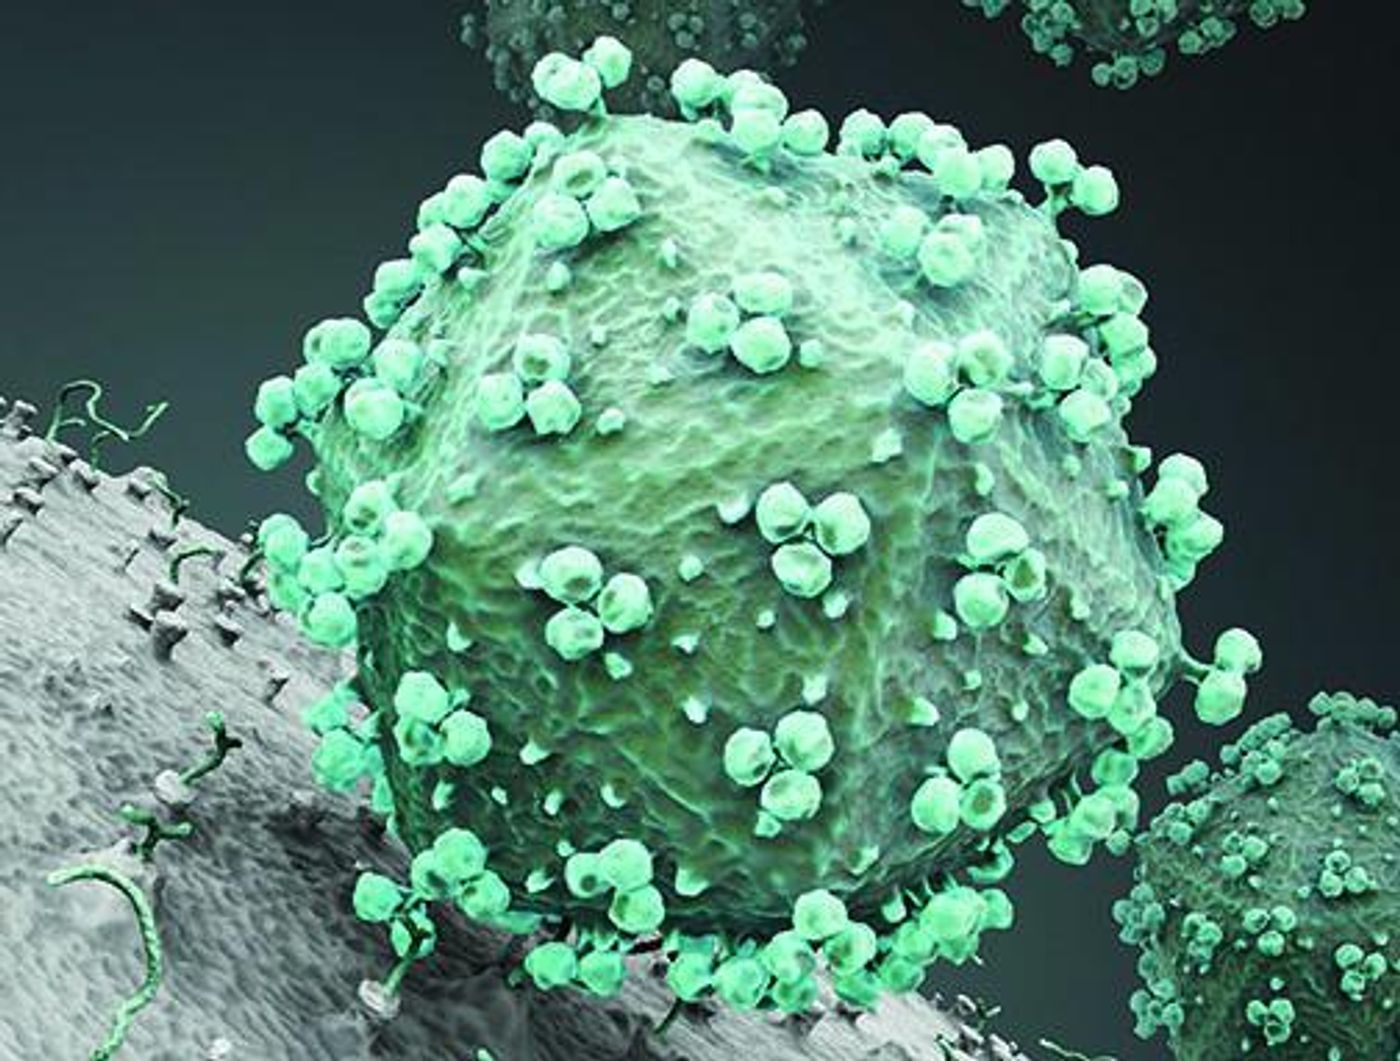 The vaccine candidates used in the study mimic the trimeric envelope protein spikes on the surface of HIV. Rendering of HIV with envelope protein trimers clearly visible on the virus surface. Credit: La Jolla Institute for Allergy and Immunology